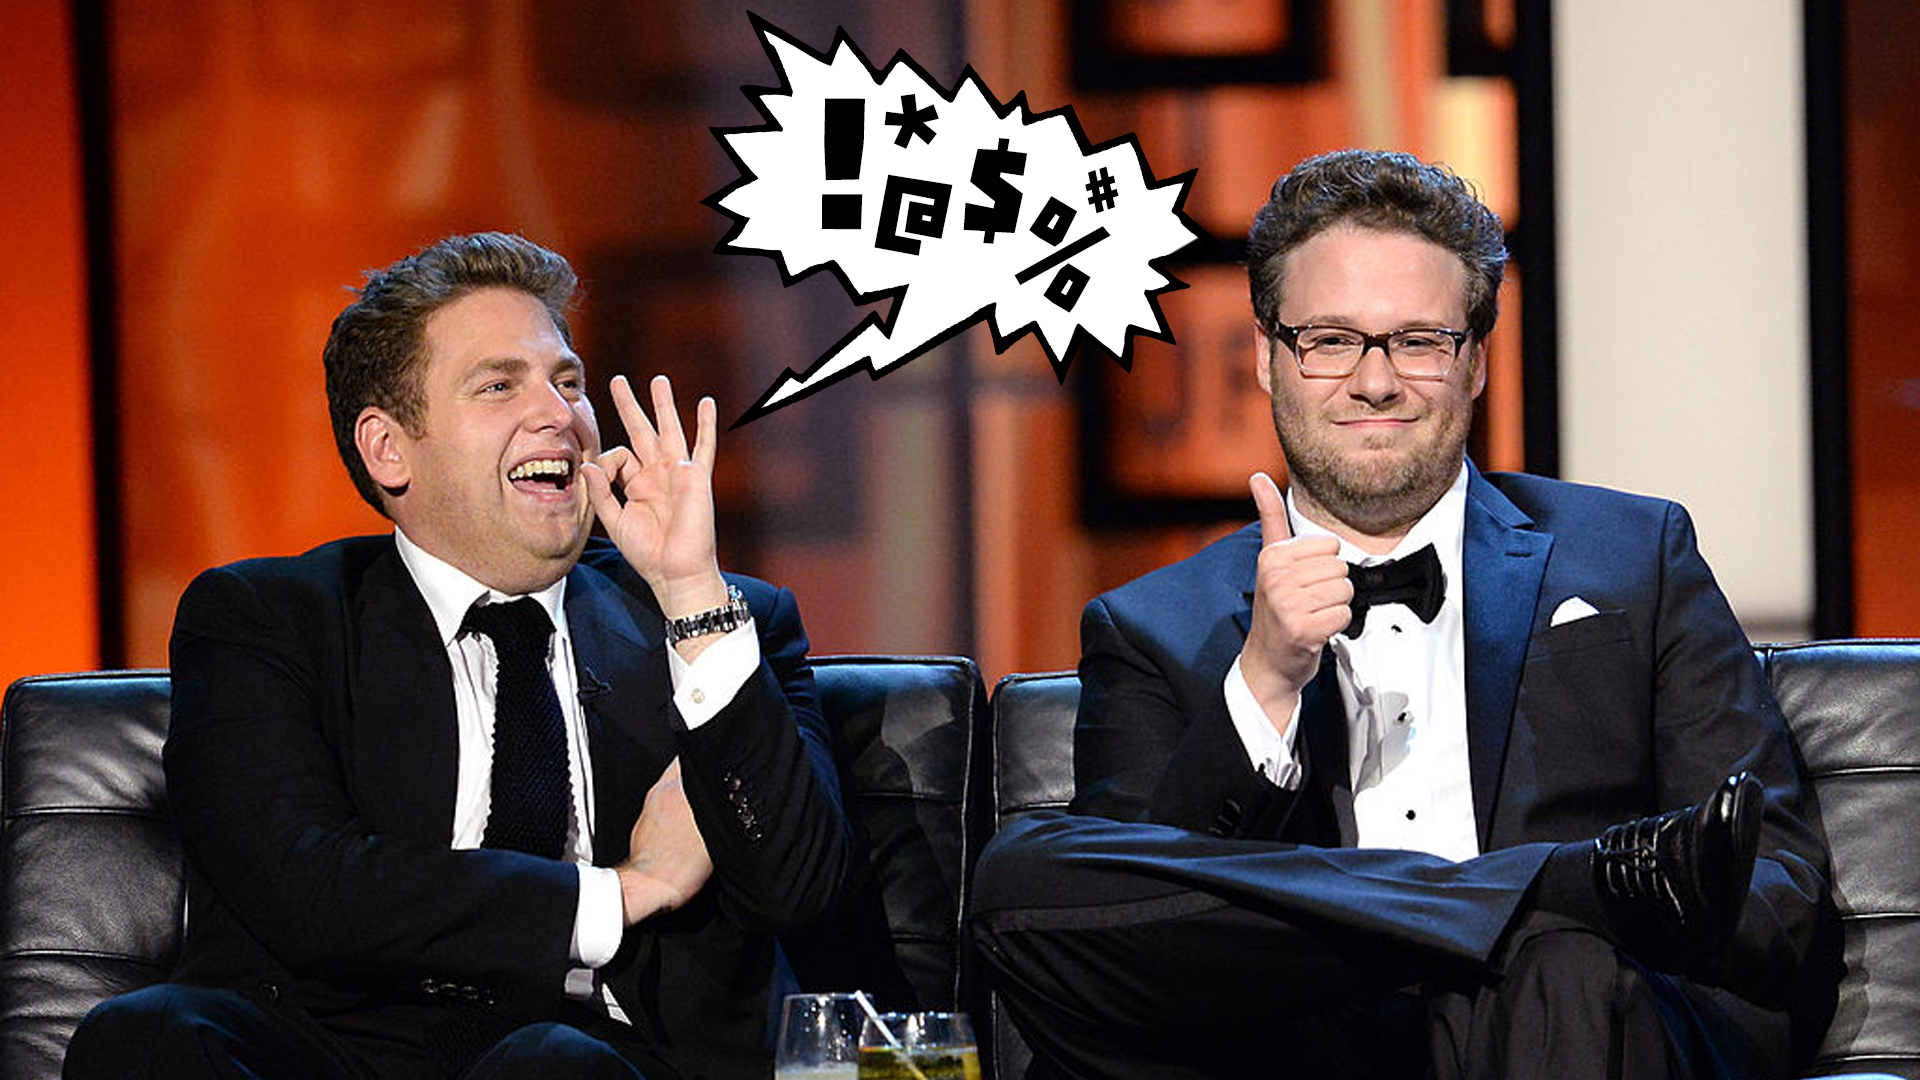 Jonah Hill And Seth Rogen Plan Documentary About Getting Exhausted By Swearing